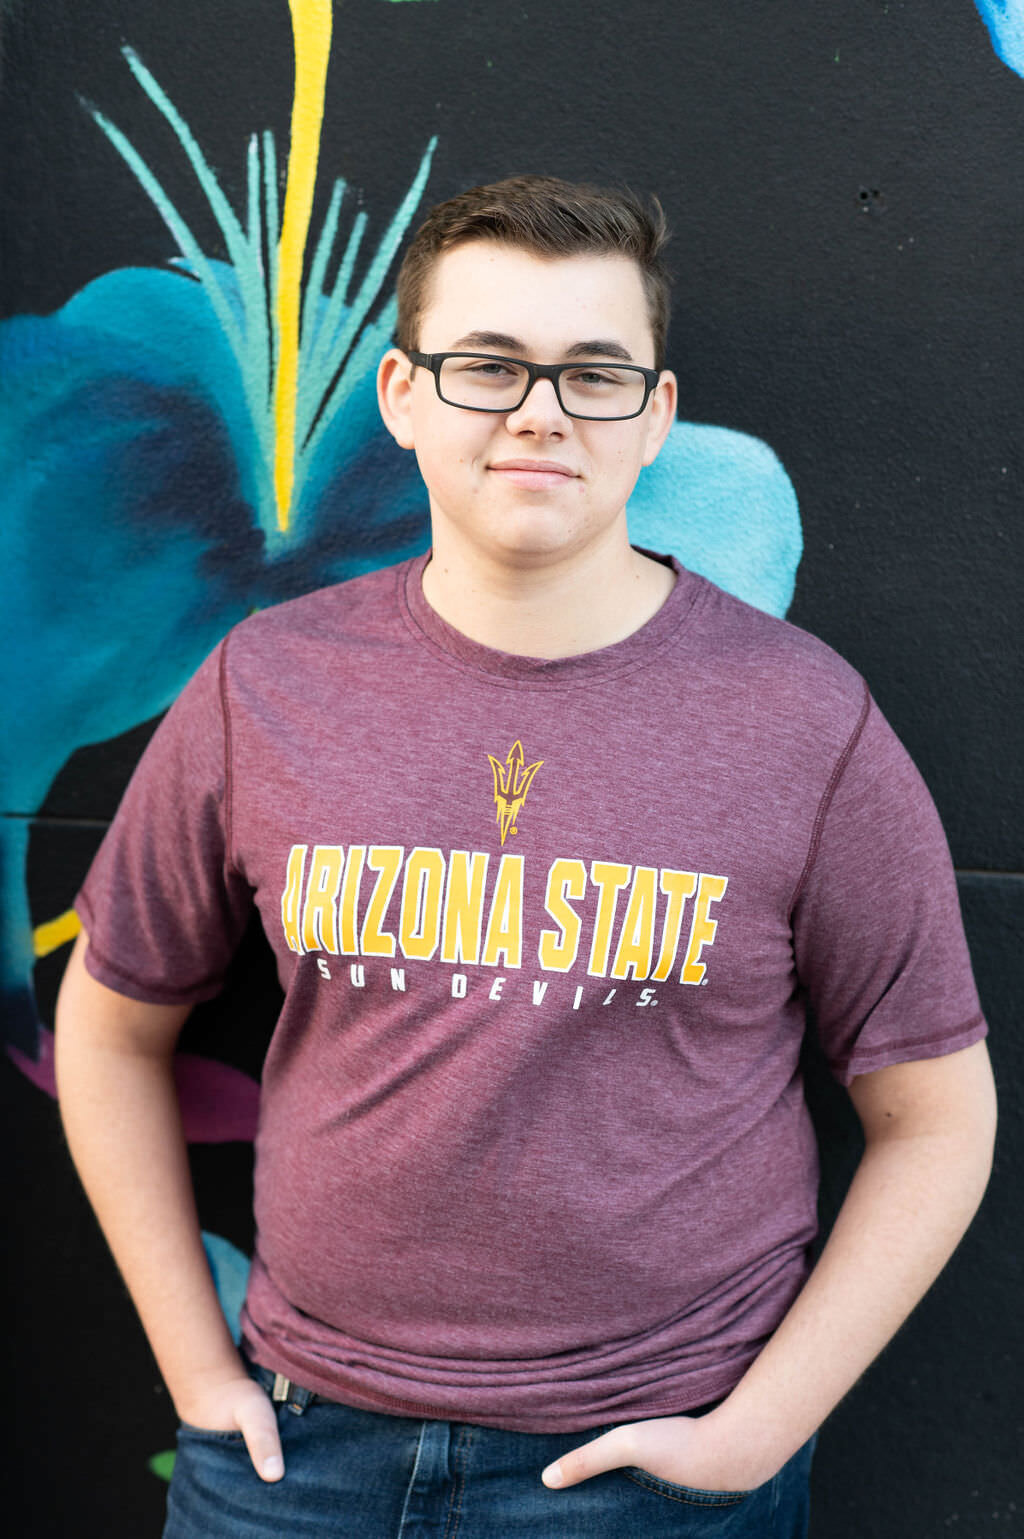 A boy in an Arizona state t-shirt smiling.